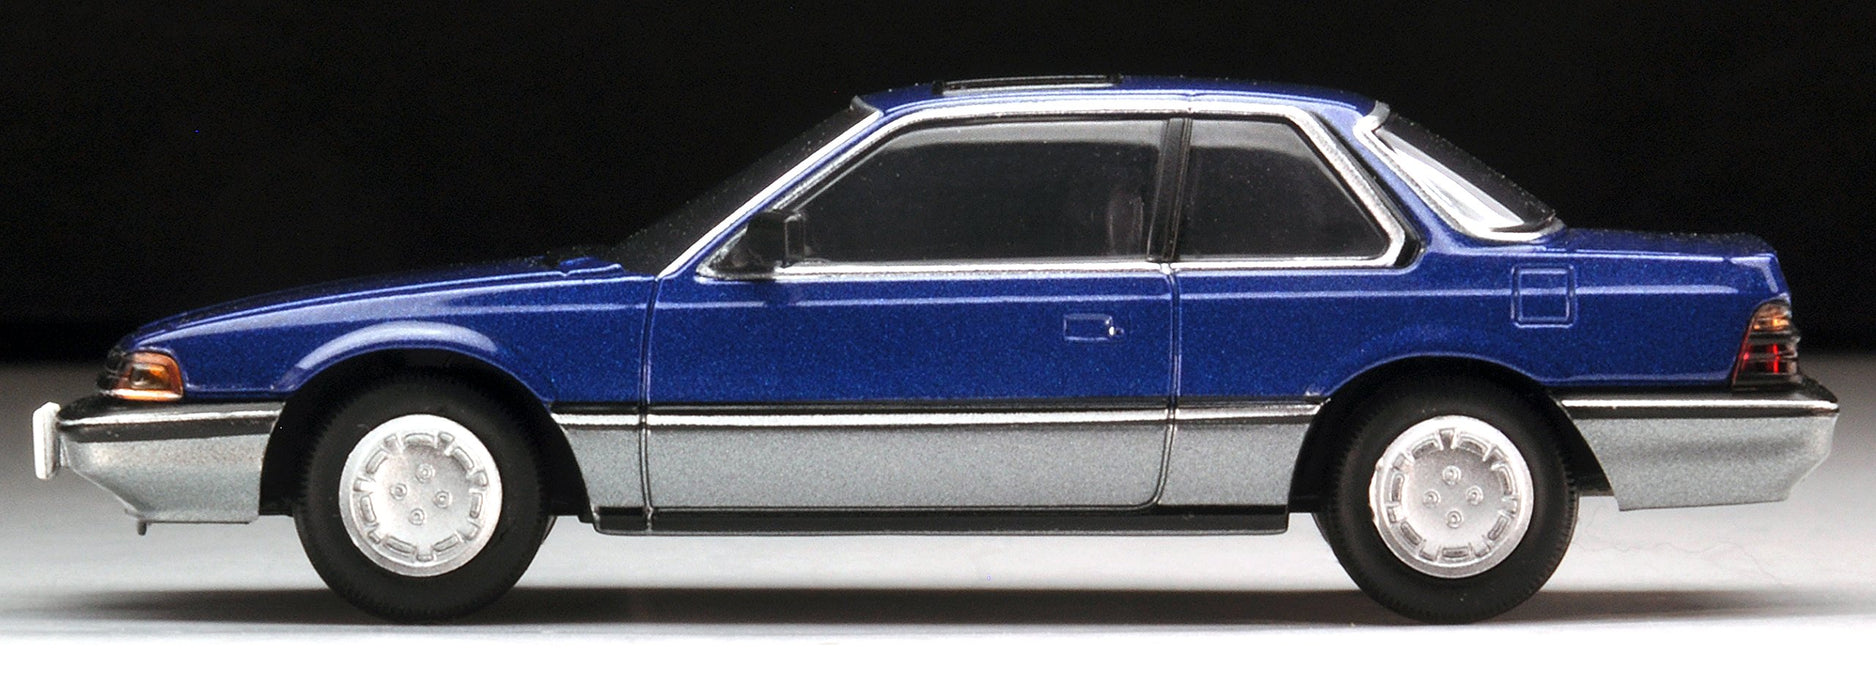 Tomytec Tomica Limited Vintage Neo Lv-N145D Honda Prelude Xx 84 Blue/Gray 1/64 Scale